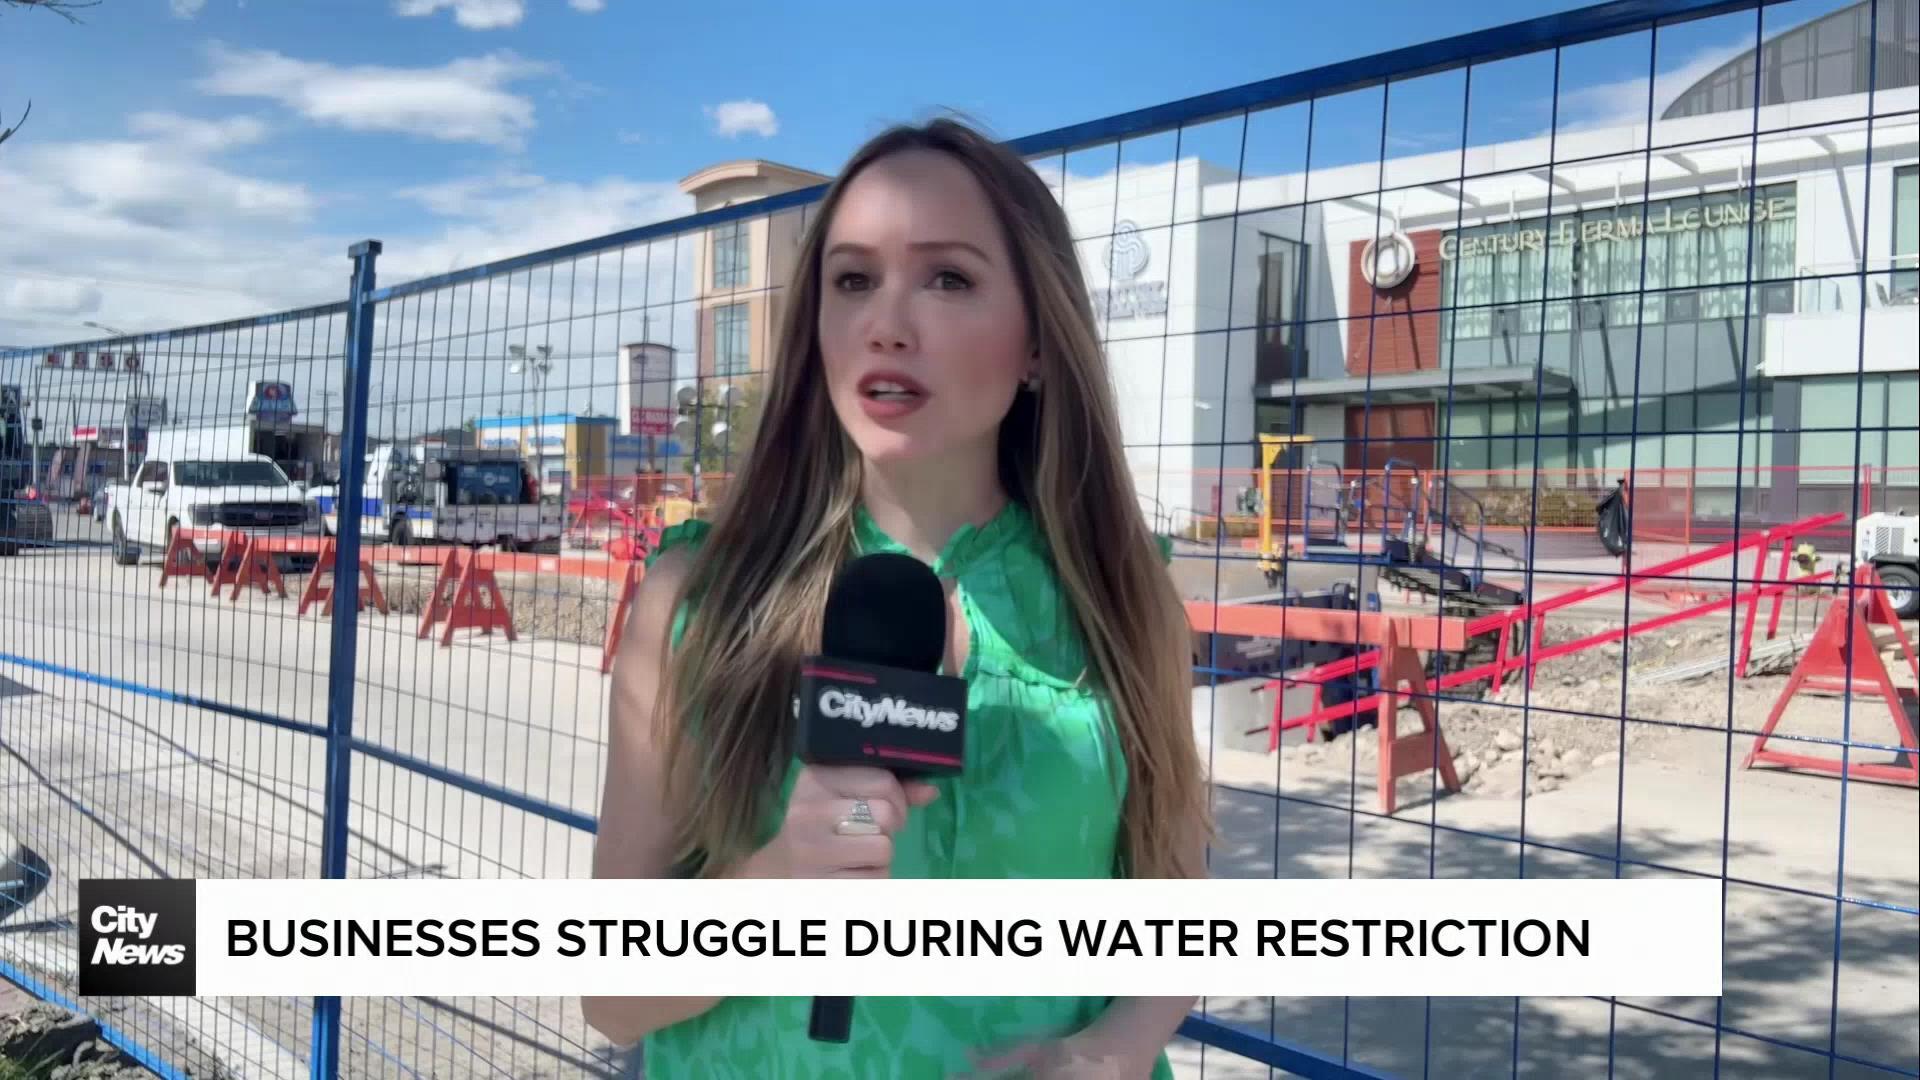 Businesses struggle during water restriction